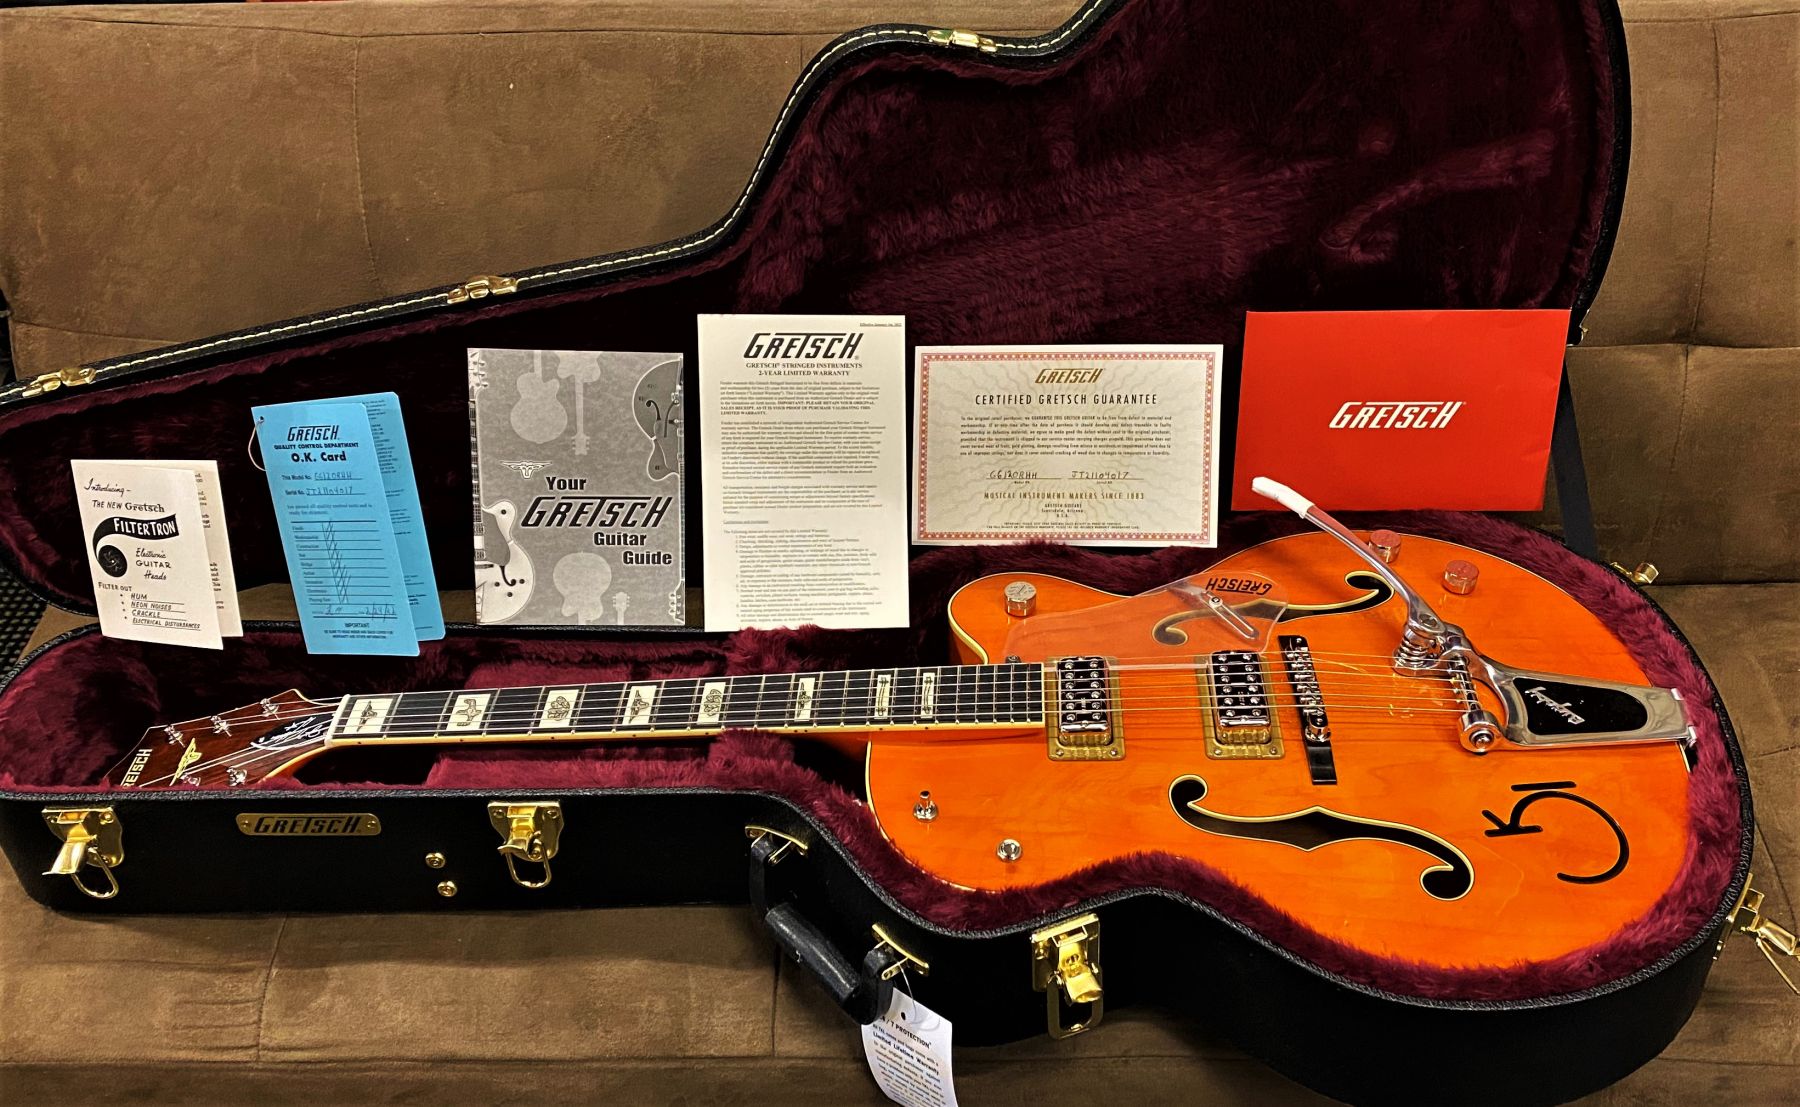 Sold - G6120RHH Gretsch Reverend Horton Heat Signature Hollow Body Bigsby,  Ebony Fingerboard, Orange Stain, Lacquer